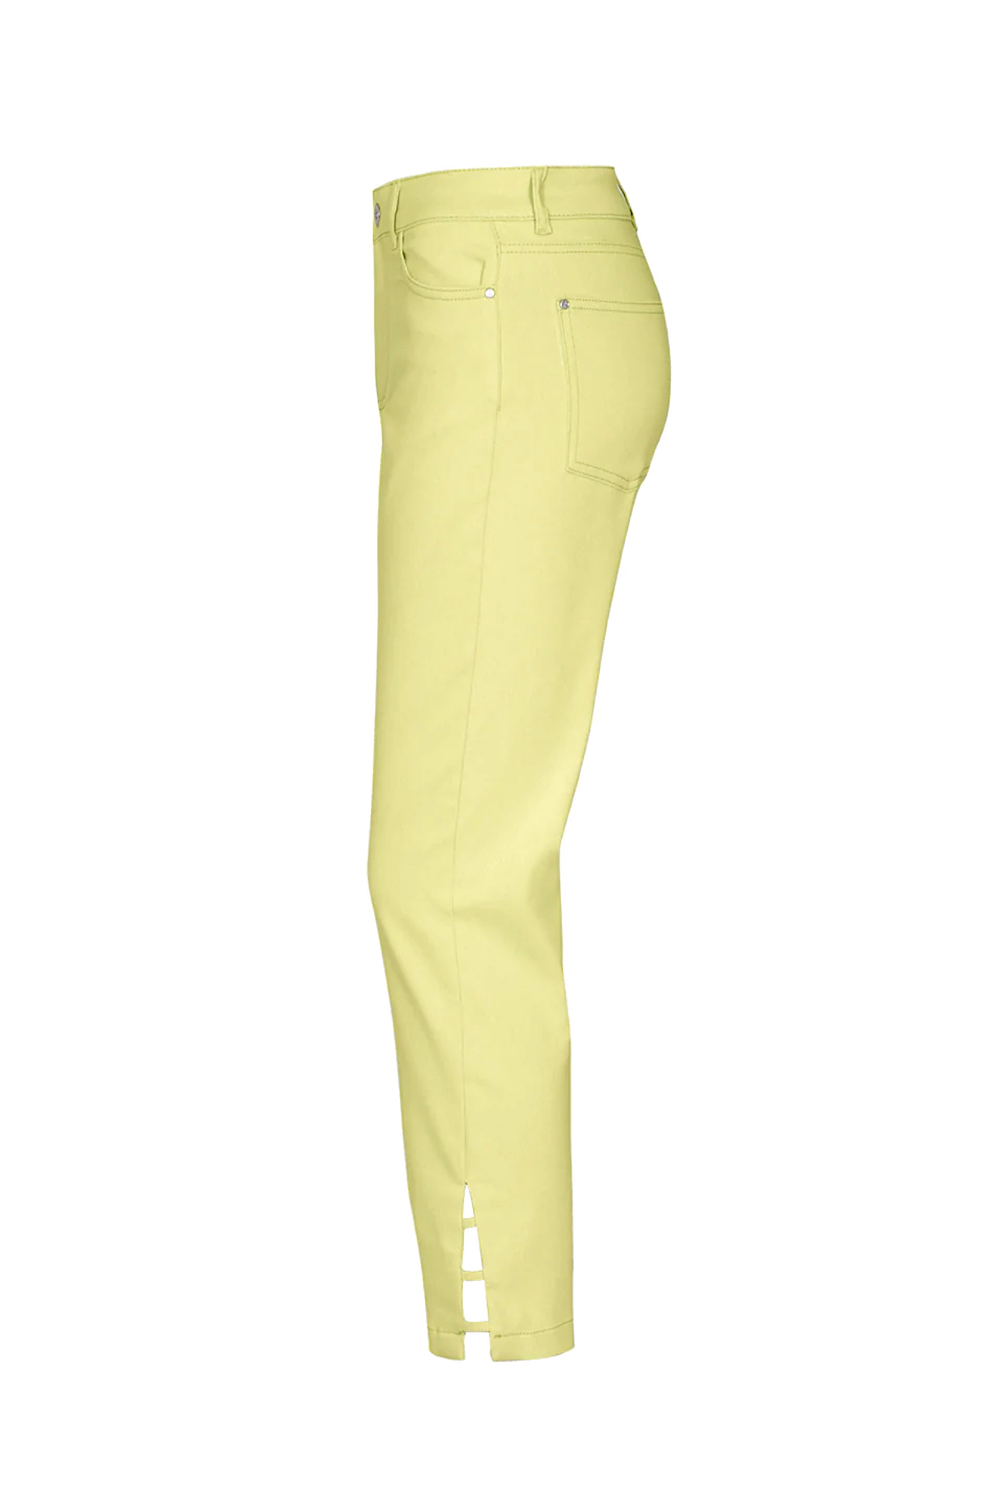 Dolcezza Cropped Cut Out Detail Pant 22202 Yellow